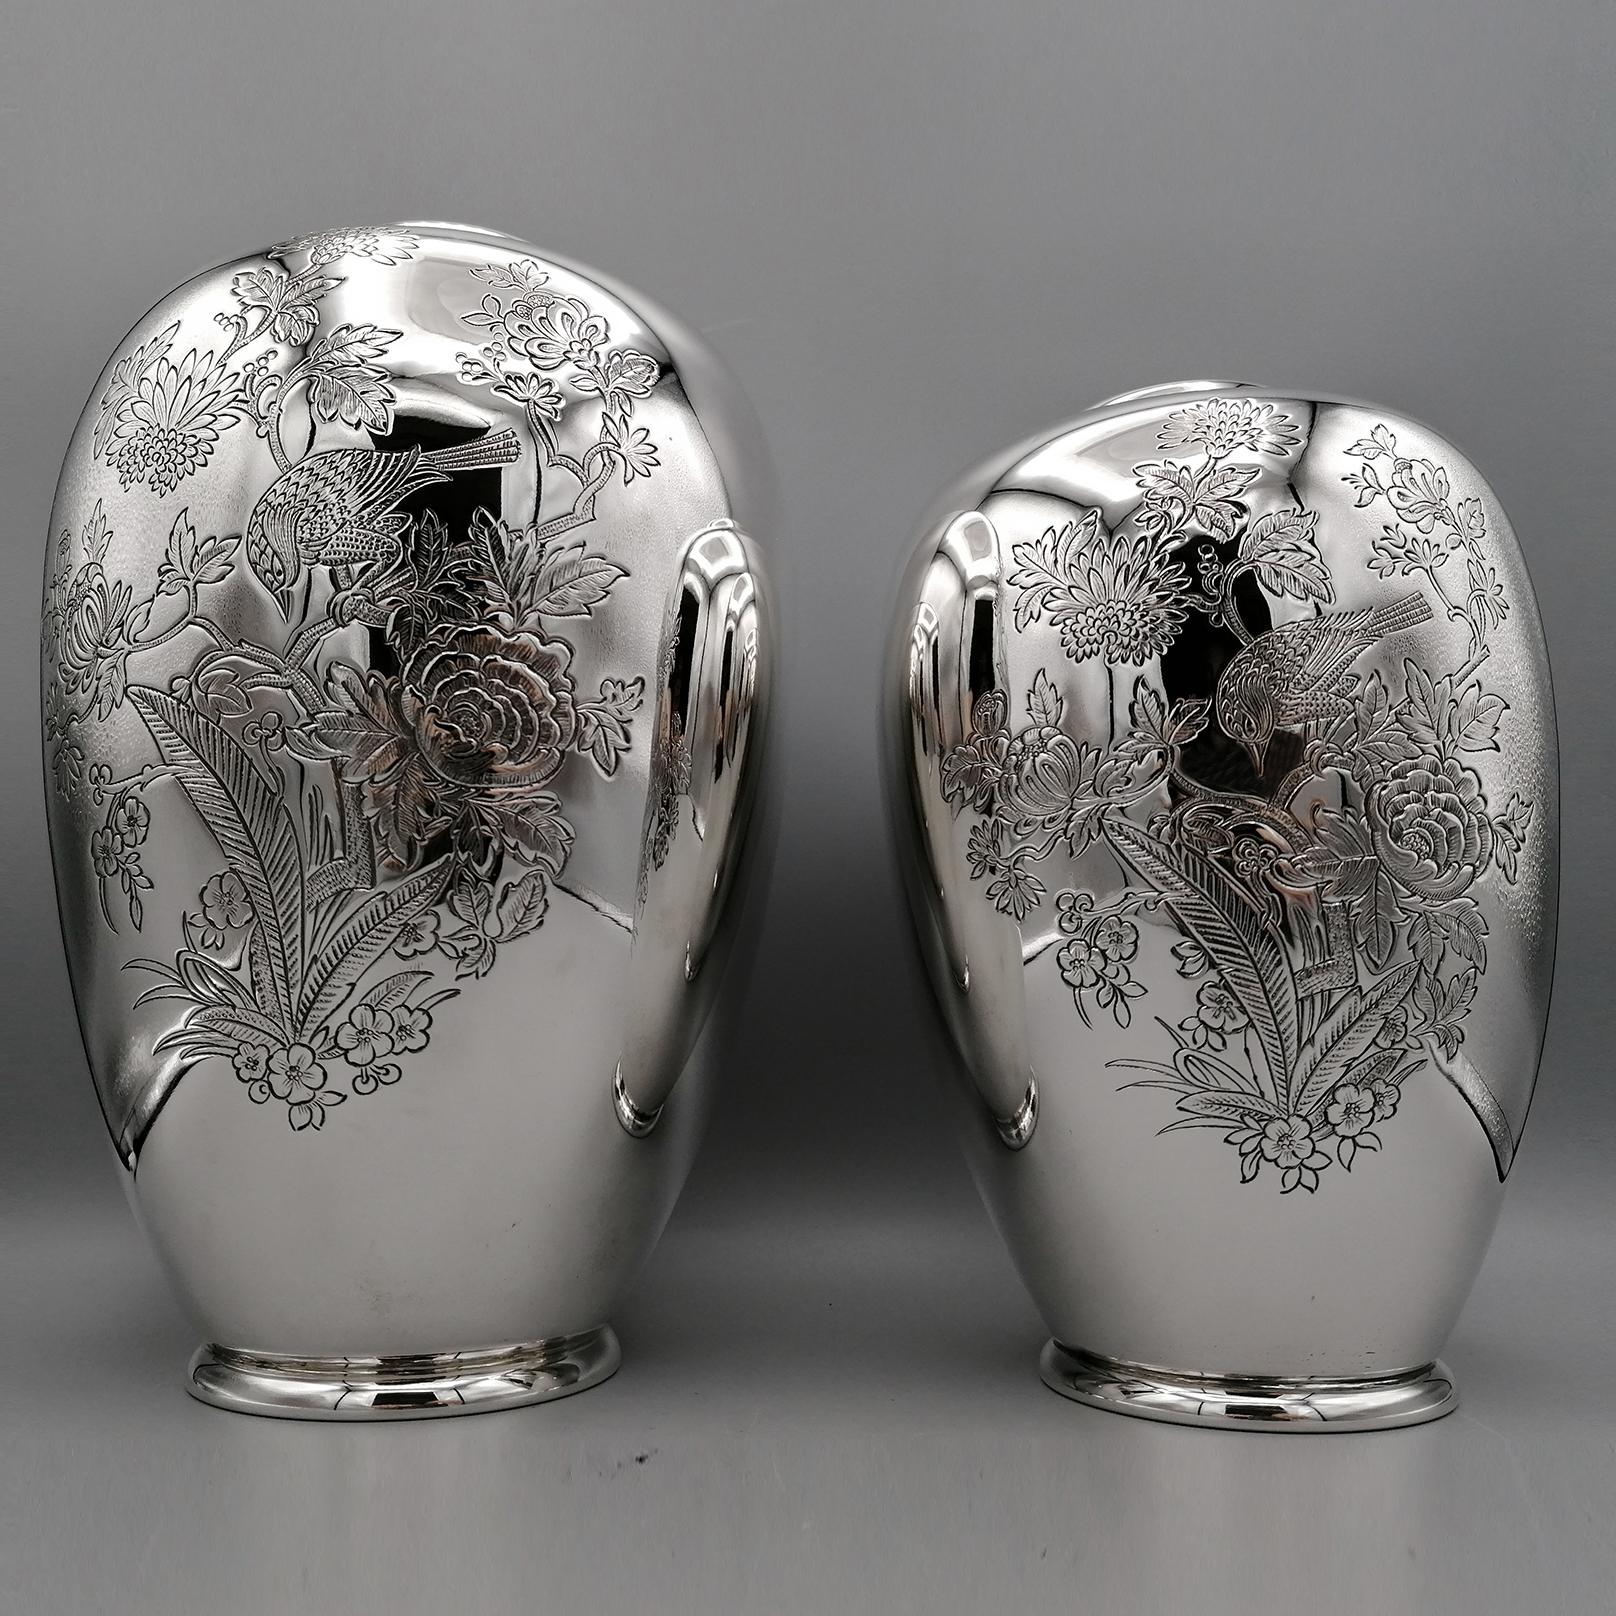 European 20th Century Italian Solid Silver Pair of Engraved Vases For Sale